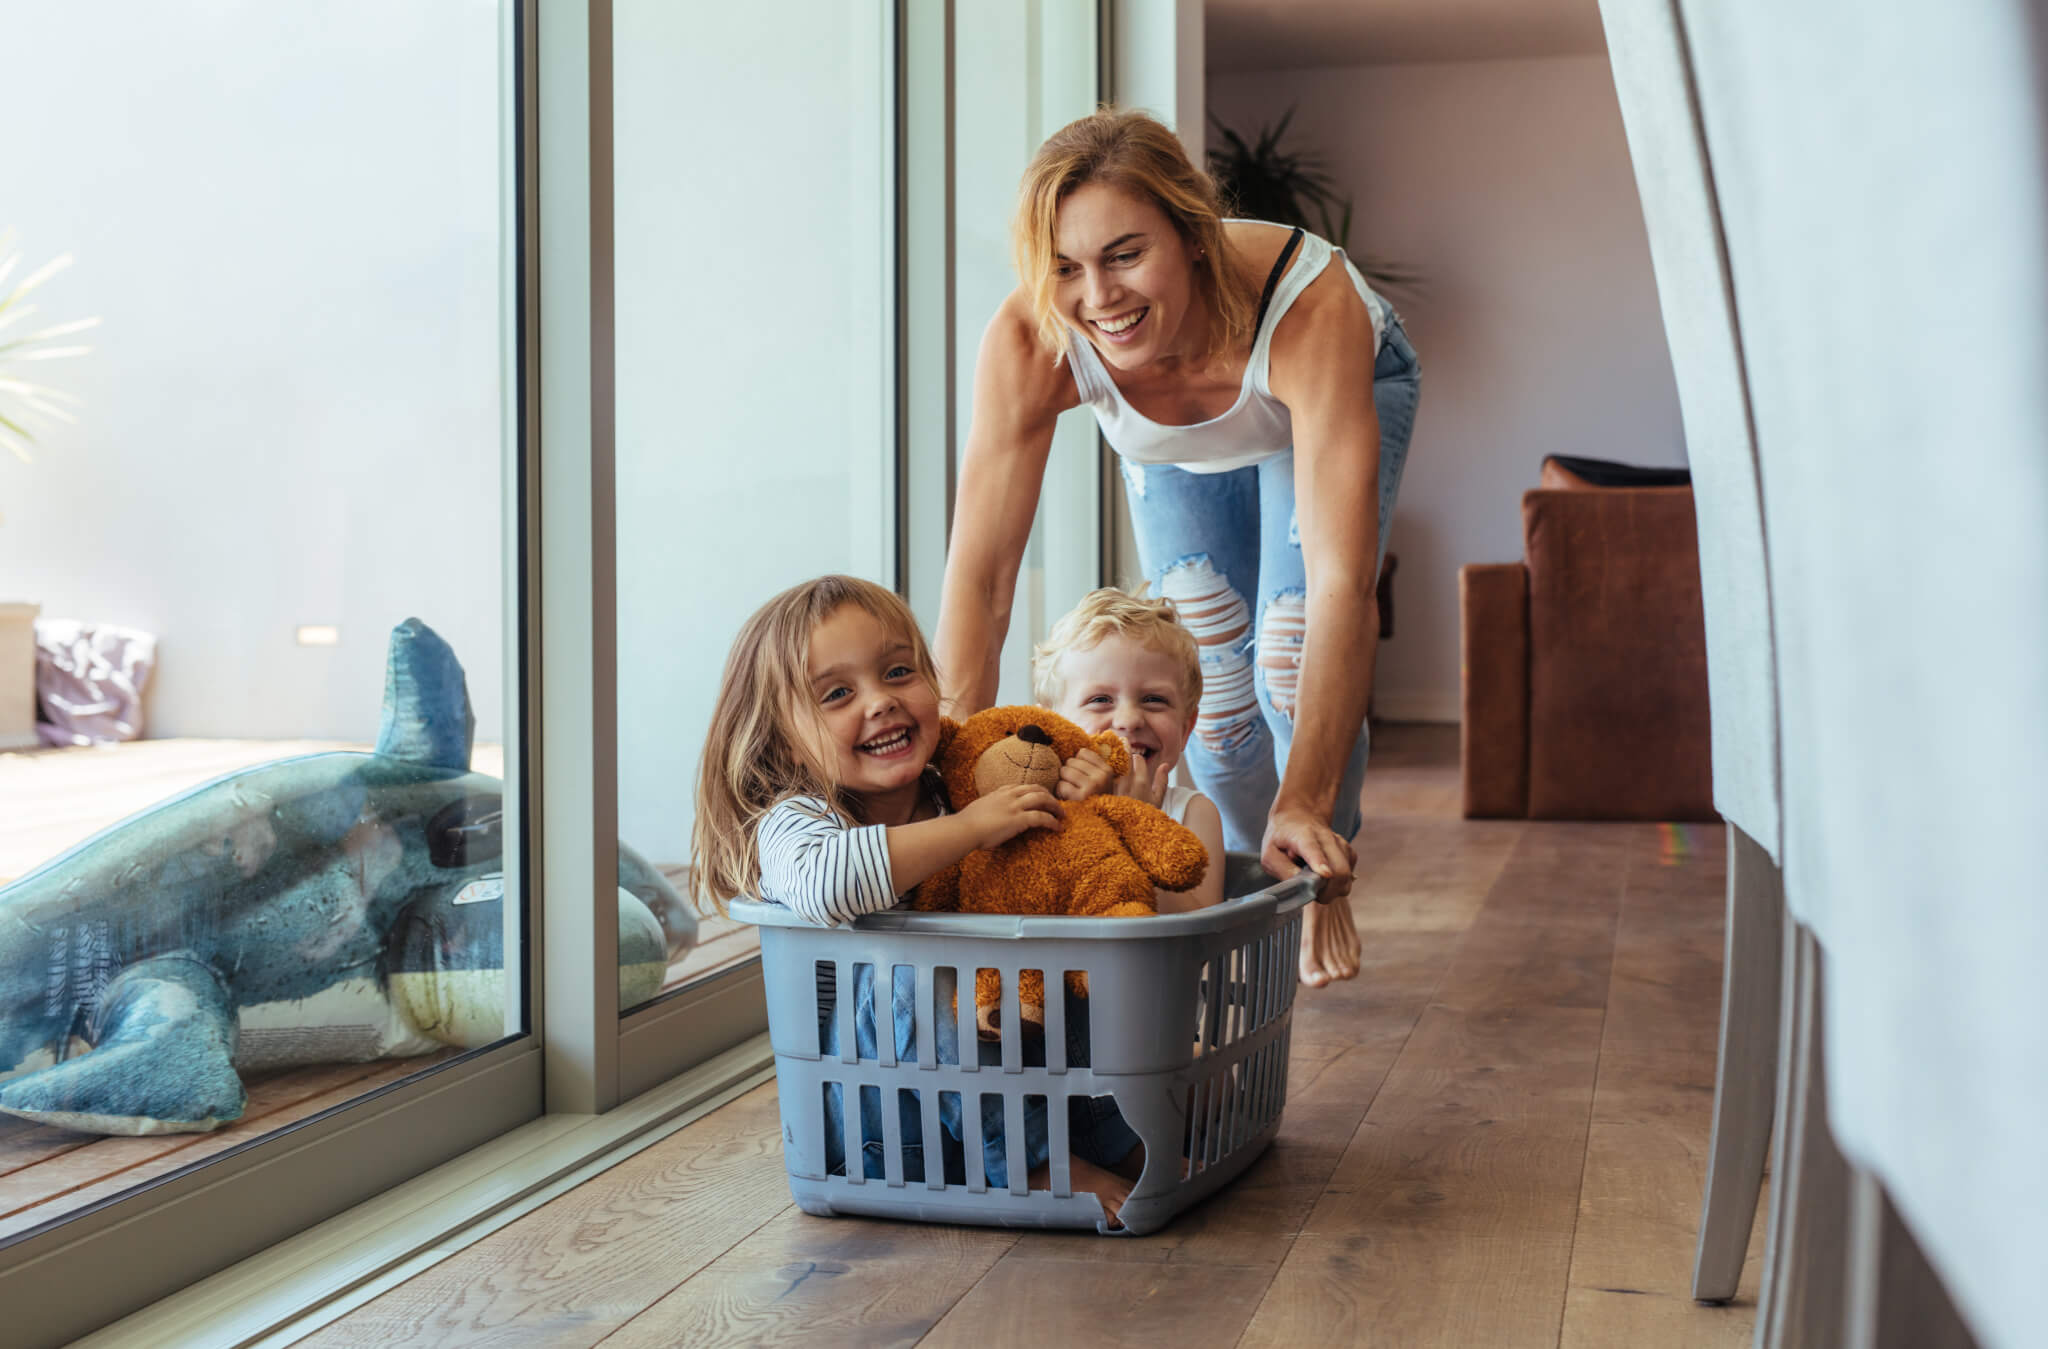 Mother playing with her children in laundry basket